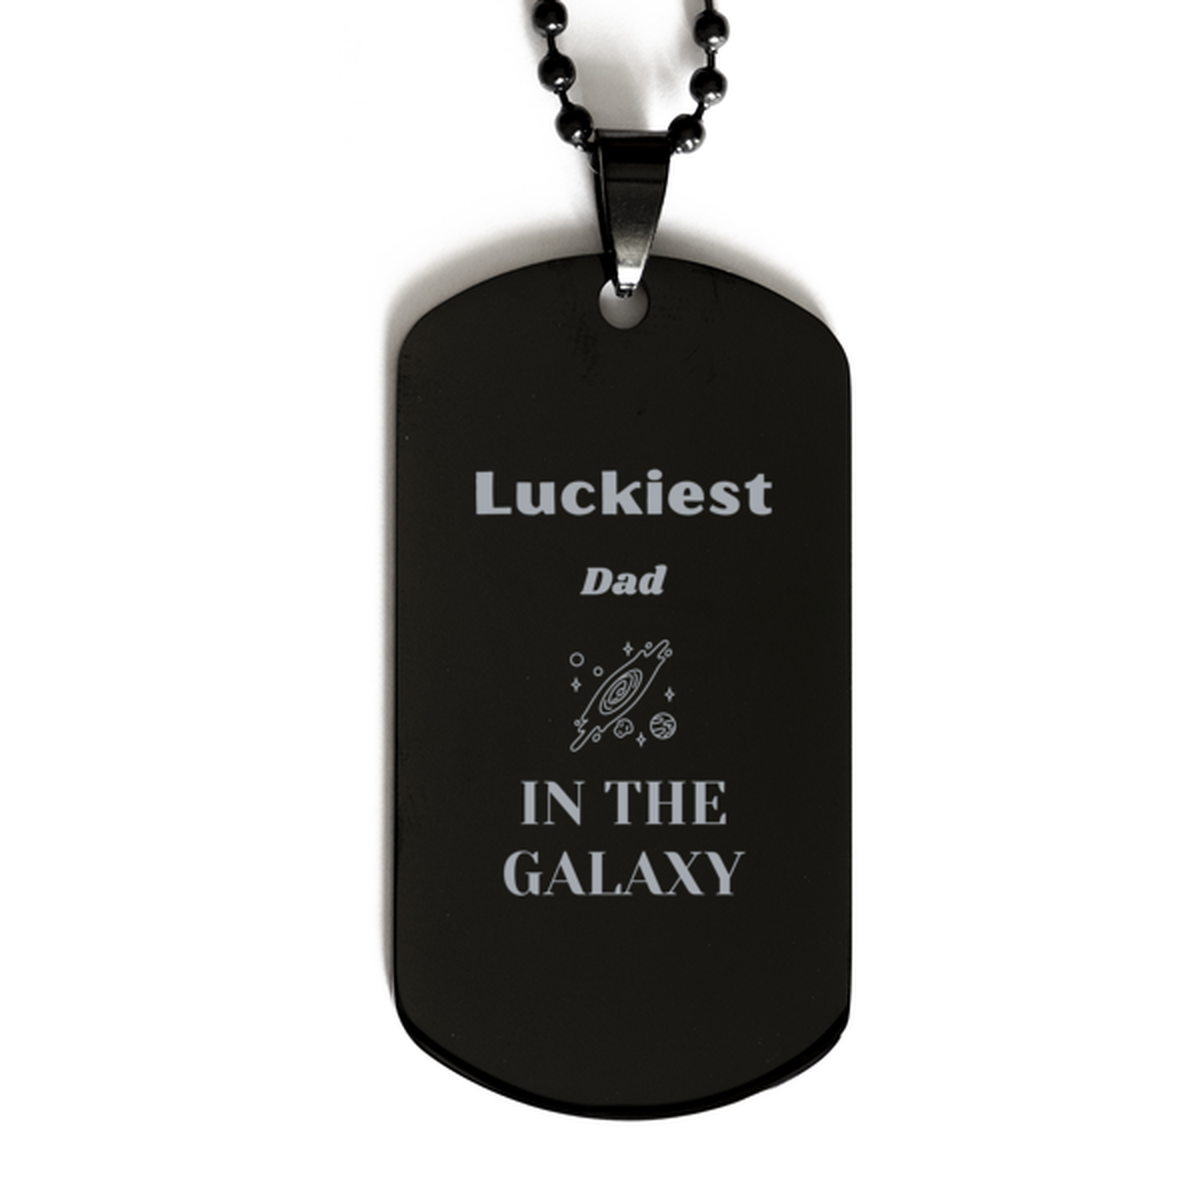 Luckiest Dad in the Galaxy, To My Dad Engraved Gifts, Christmas Dad Black Dog Tag Gifts, X-mas Birthday Unique Gifts For Dad Men Women